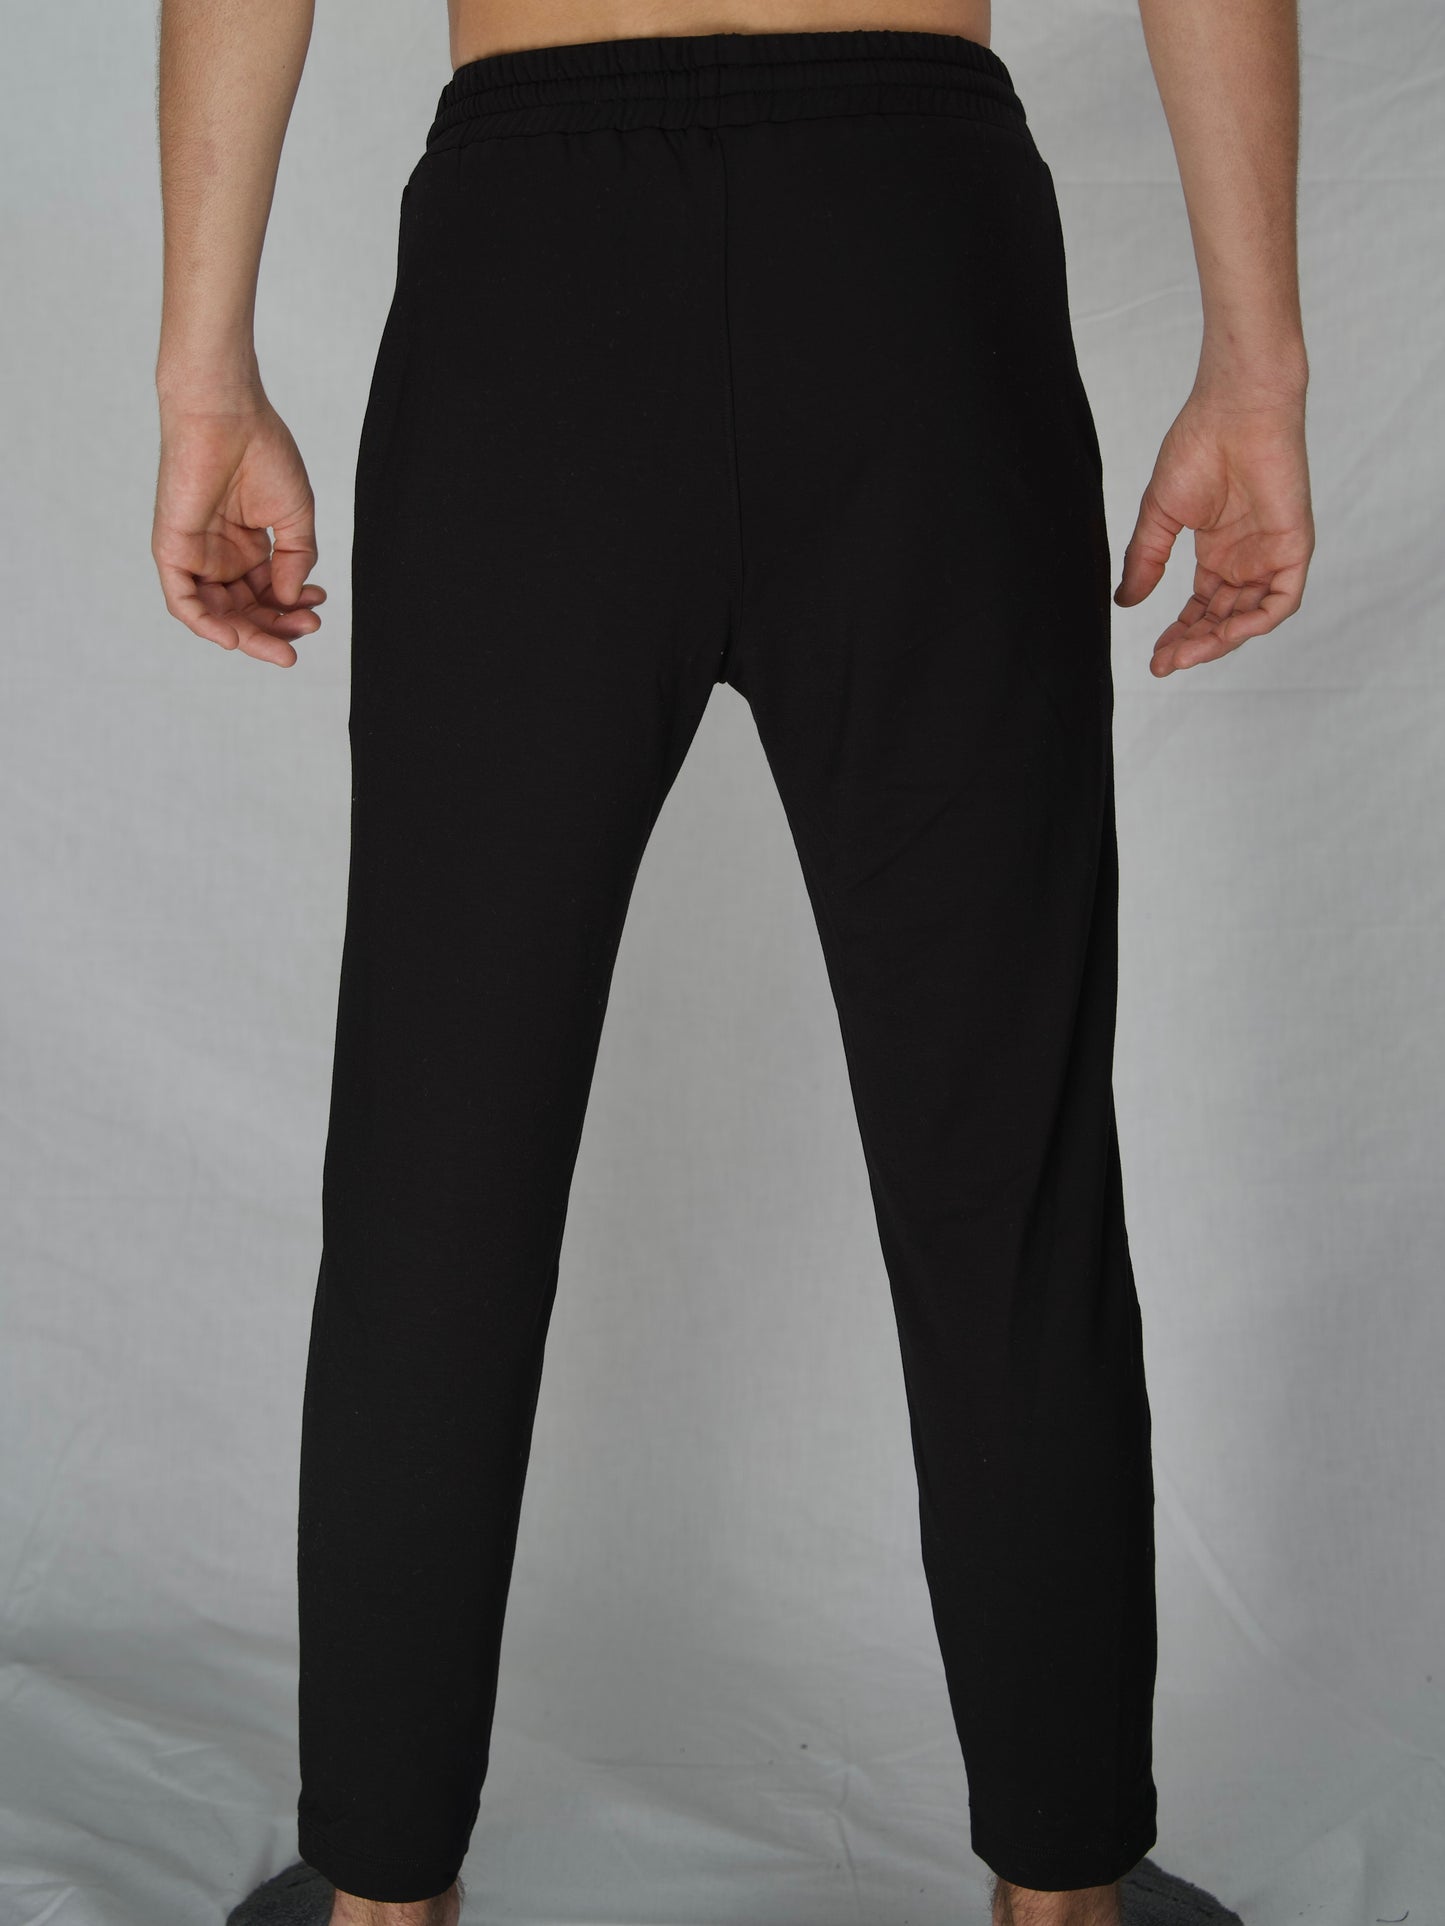 Evade Fit Cropped Joggers for Men